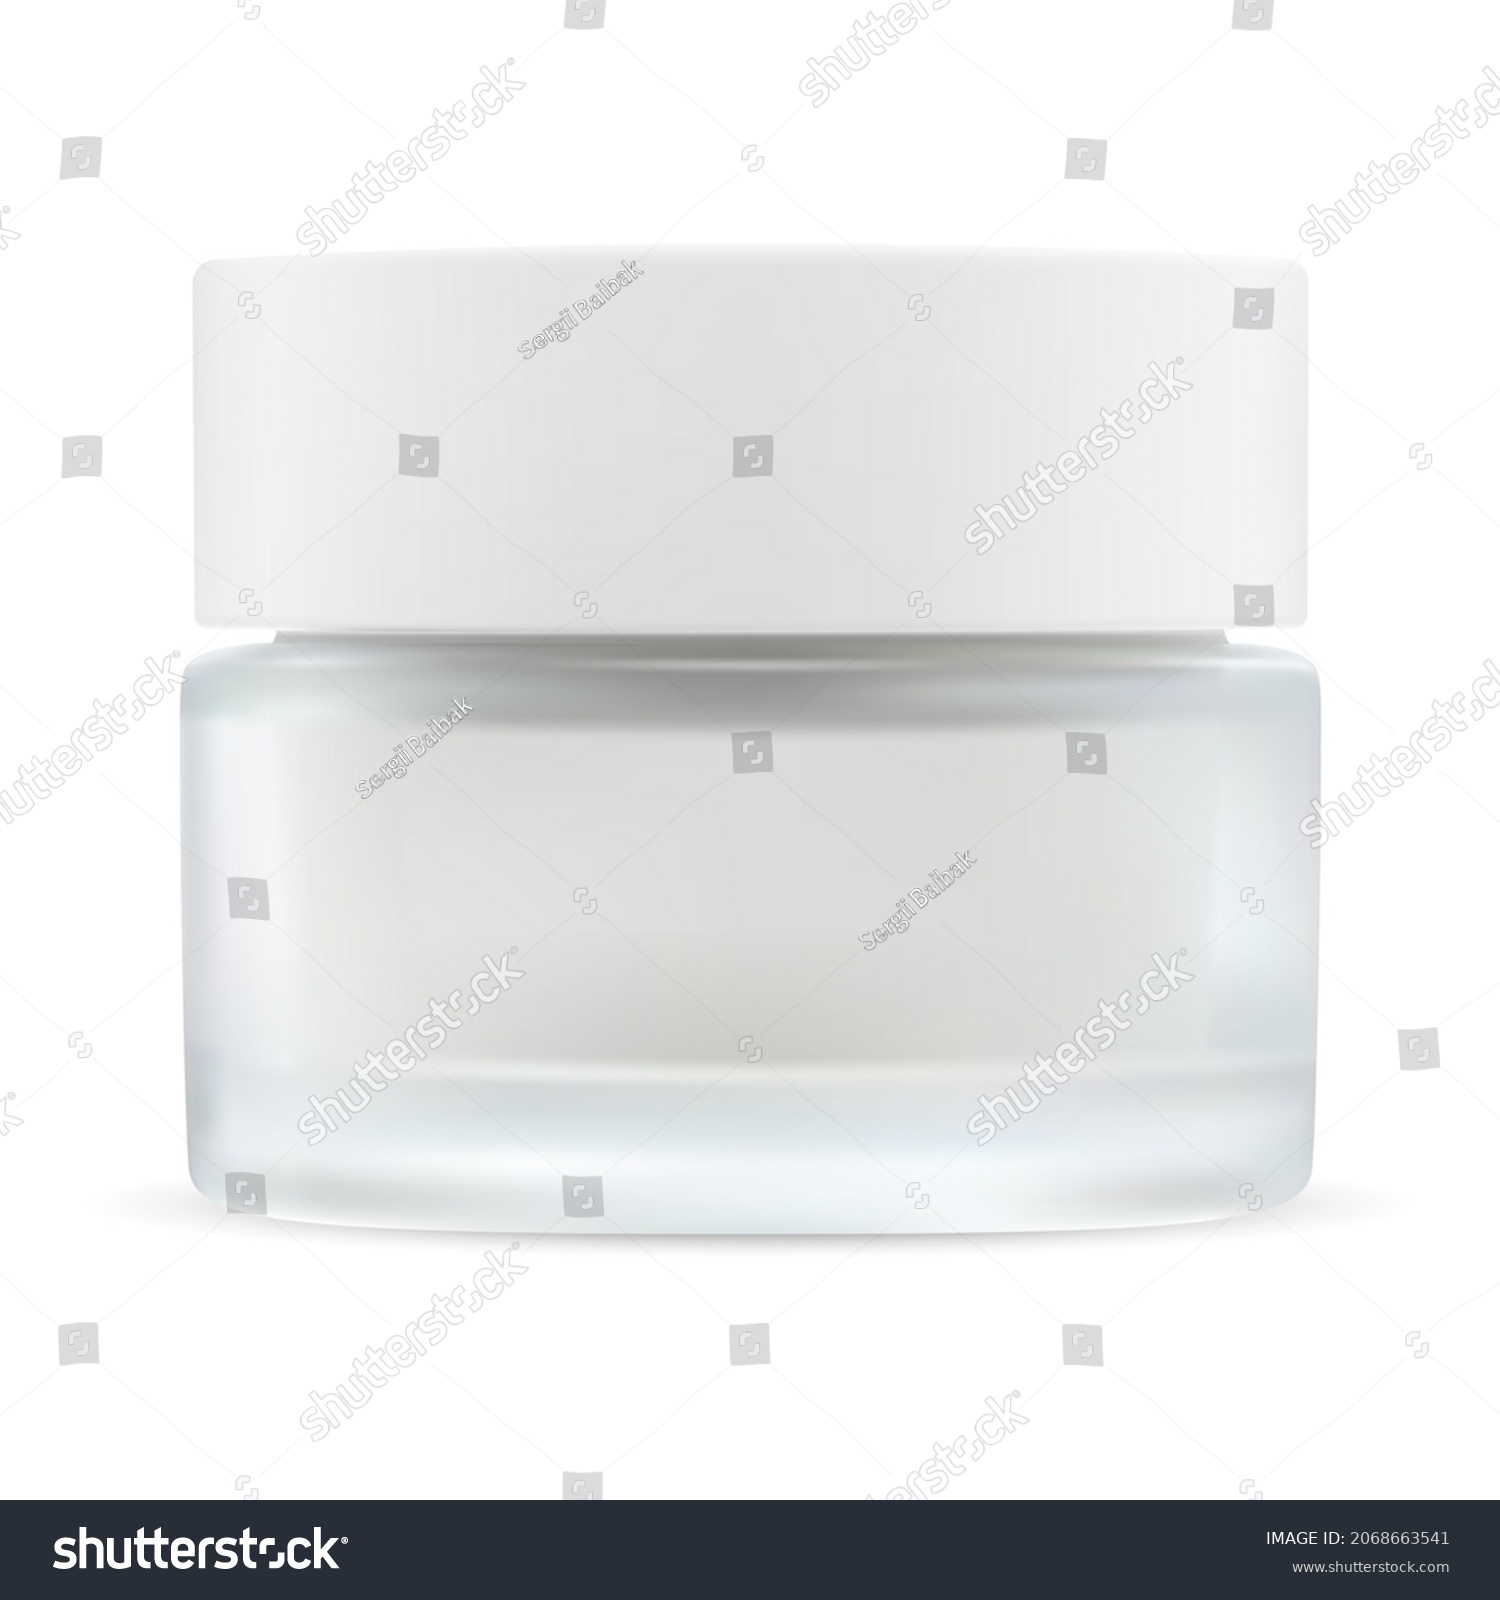 SVG of Glass cream jar. Cosmetic cream container blank. White plastic cap glass pot mockup illustration. Round skin blush powder or gel tin template mock up. Creme jar no label, logo for your brand svg